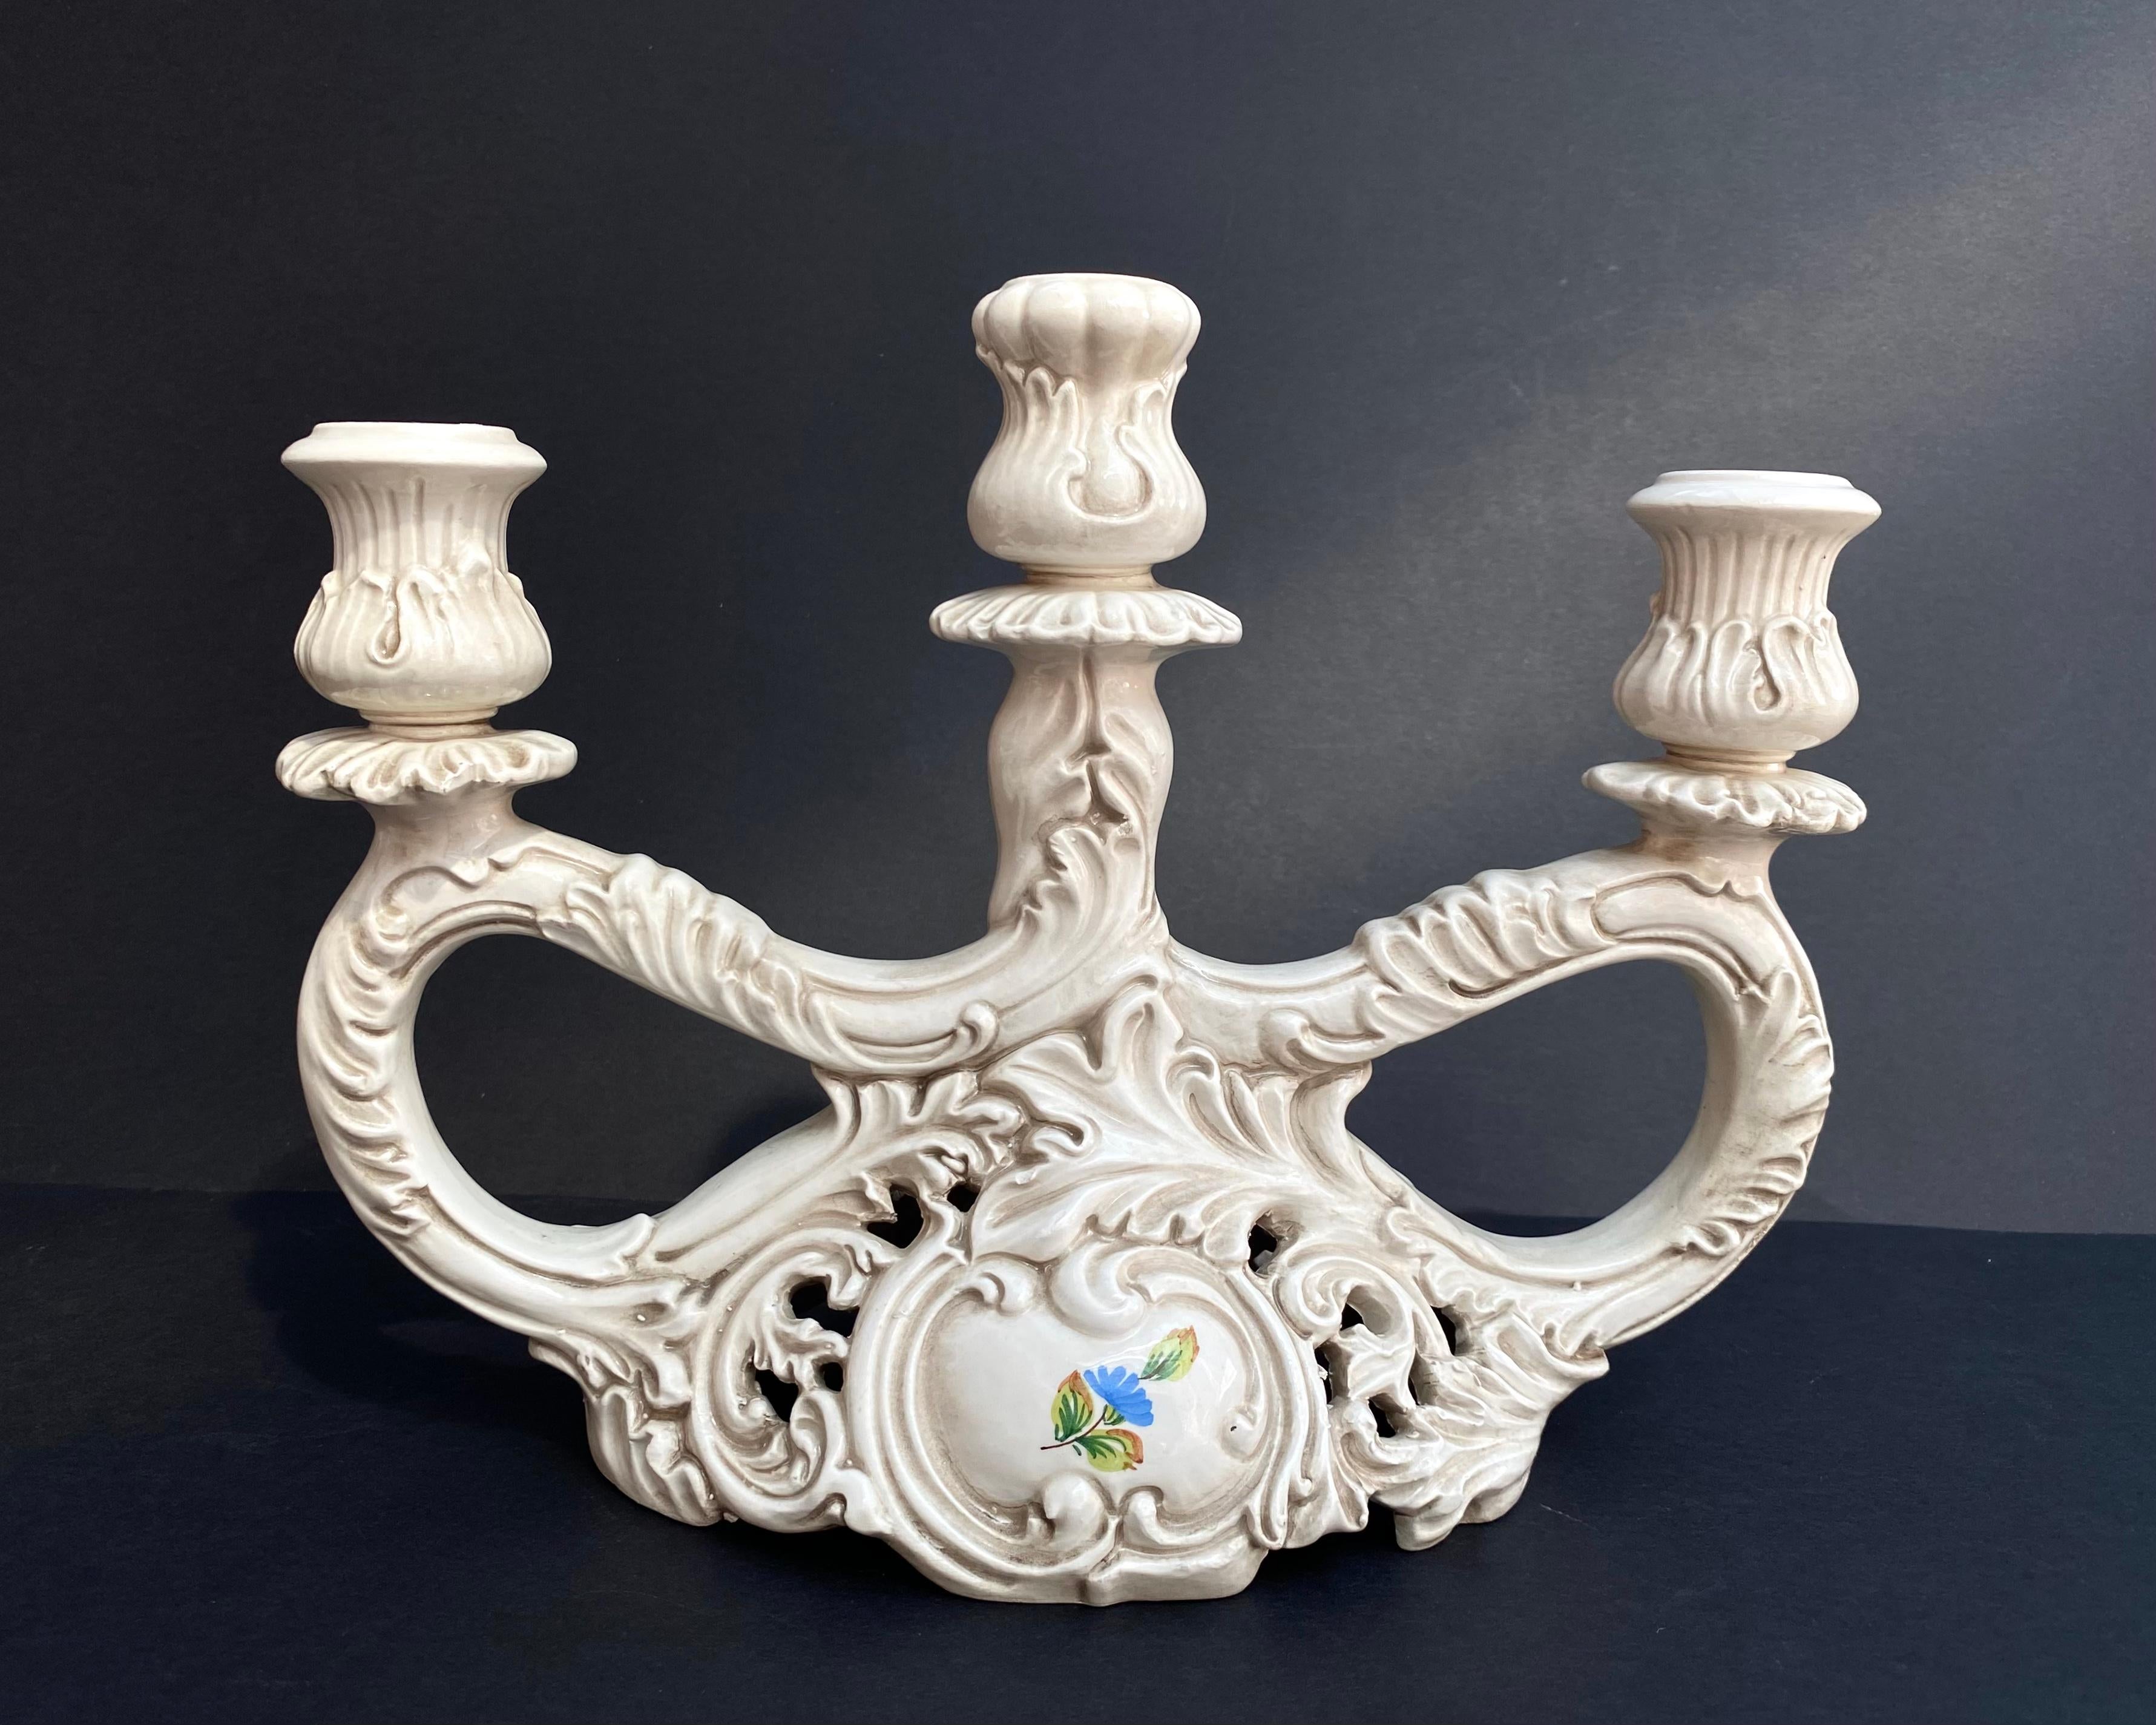 Wonderful hand painted candleholders with patina. Set 2.

Antique candleholder for three candles with floral decor by the Italian porcelain manufacturer.

Early 20th century.

The candle holders stamped on the bottom F.lli Bosello.

The